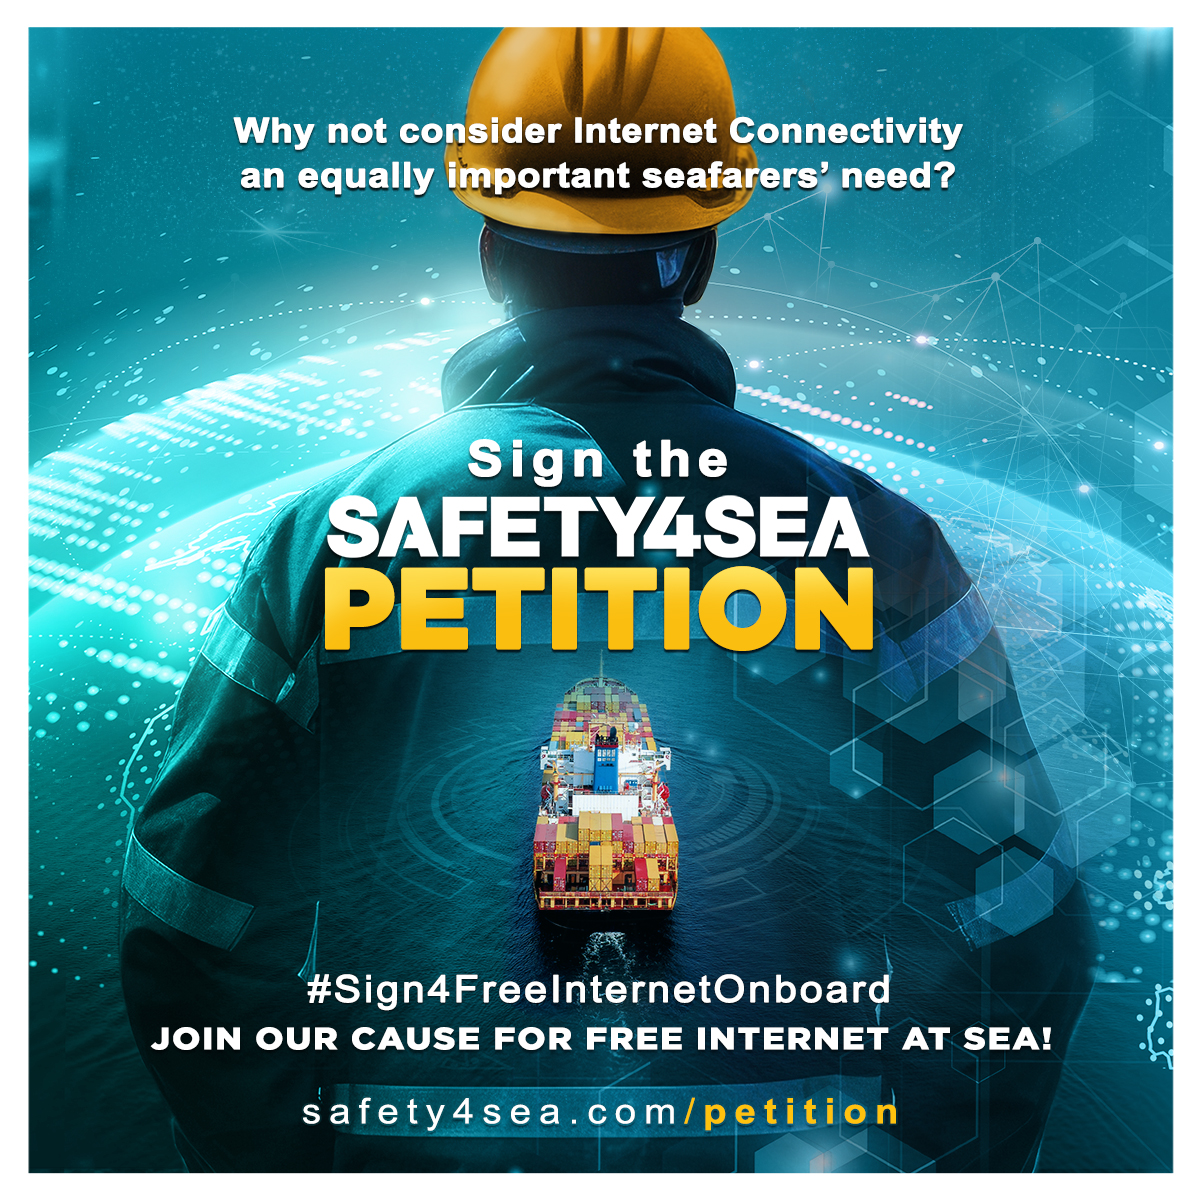 Sign the SAFETY4SEA Petition: Why not consider Internet Connectivity an equally important seafarers’ need?